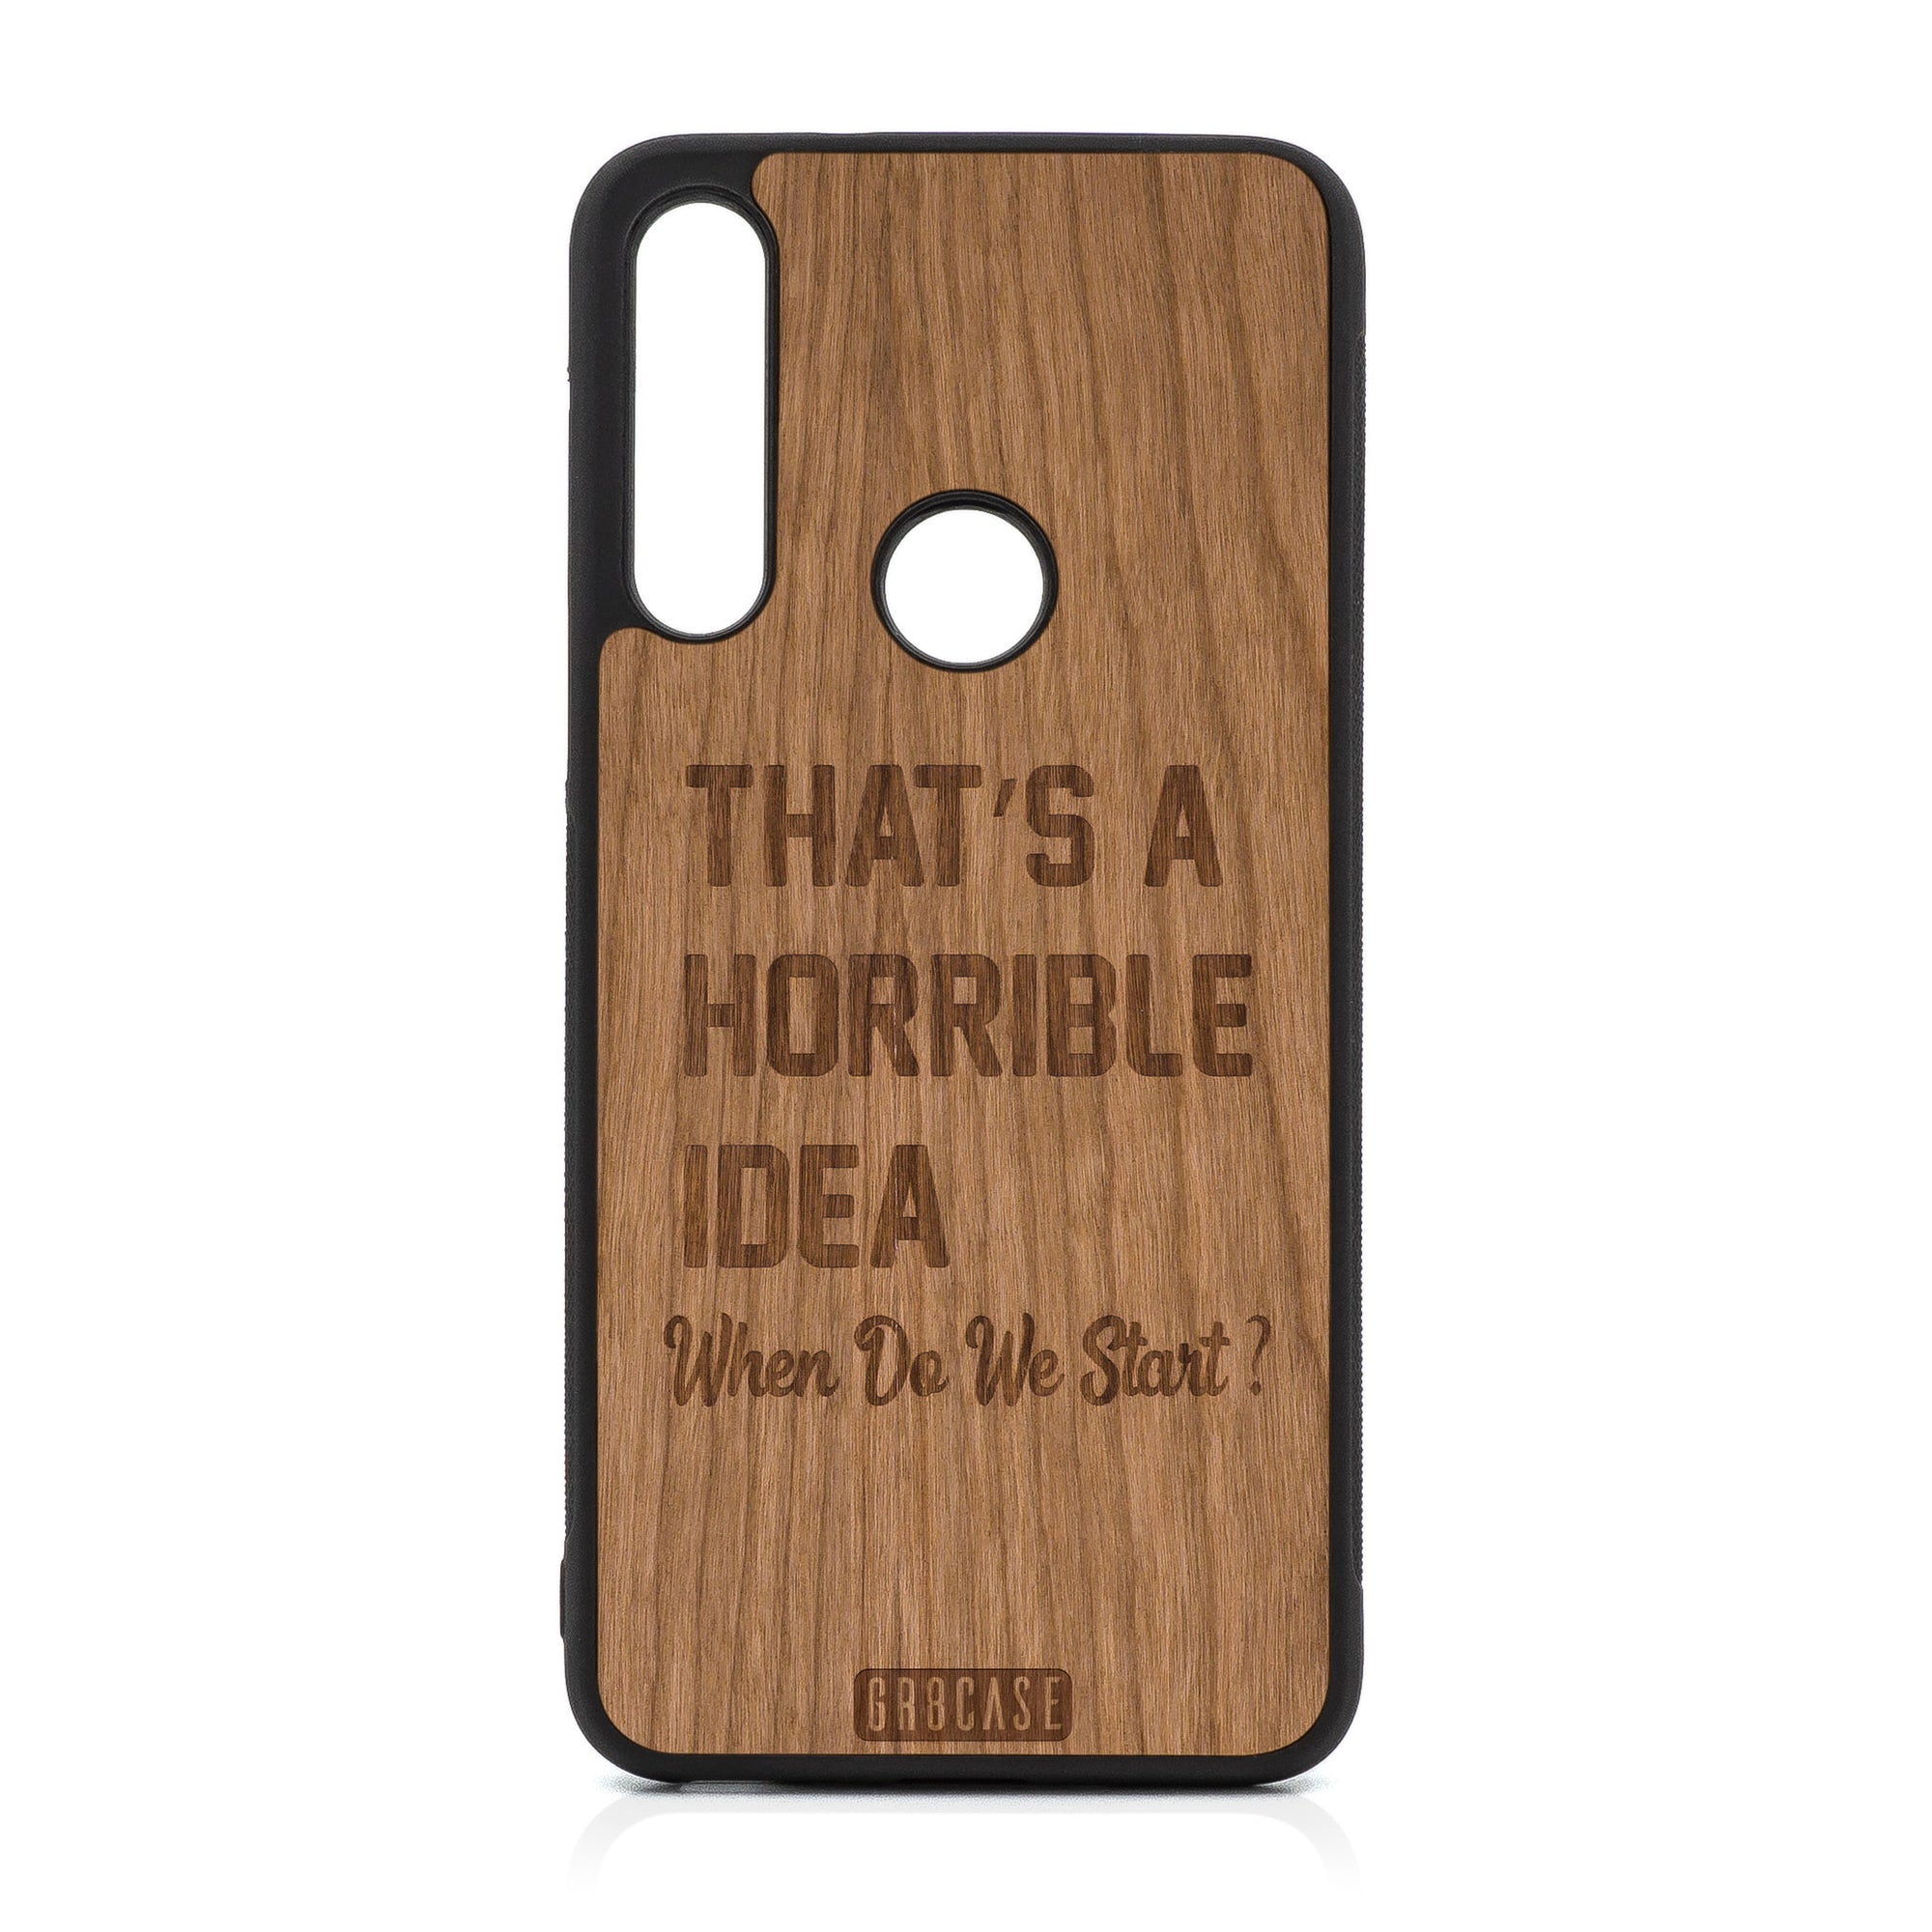 That’s A Horrible Idea When Do We Start Design Wood Case For Moto G Fast